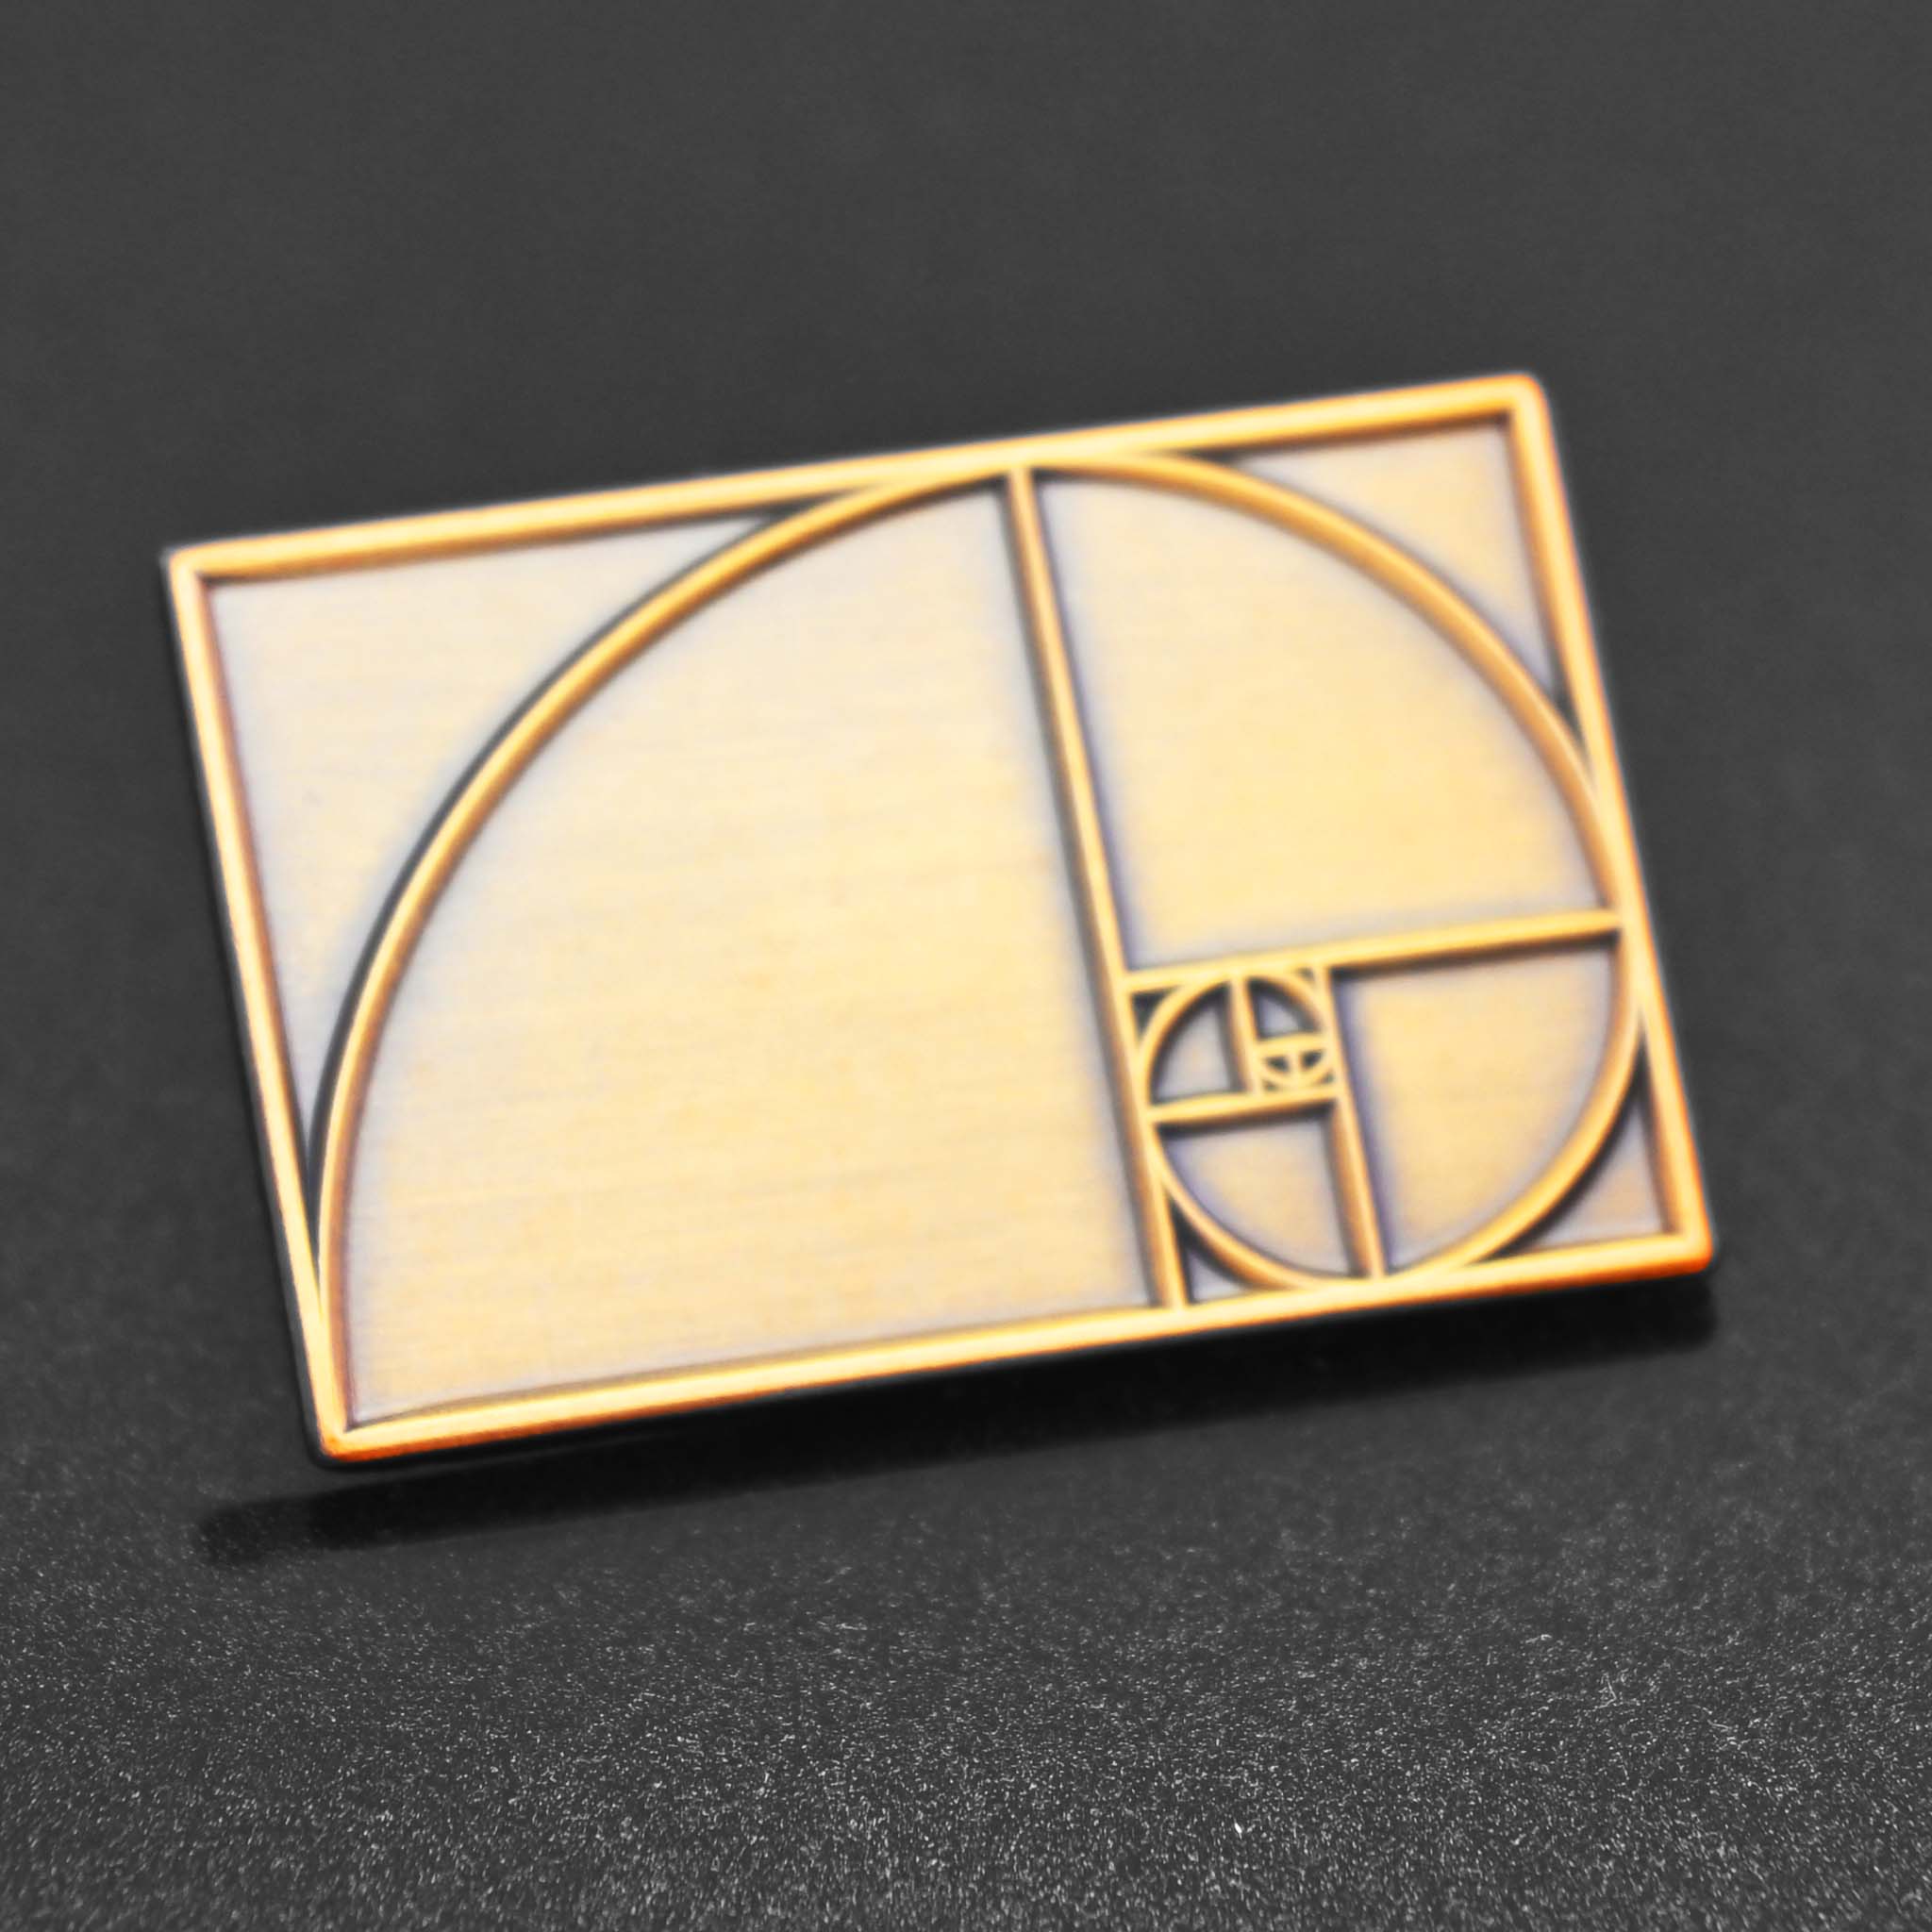 An antique brass enamel pin featuring the Golden Ratio - perfect for designers and artists